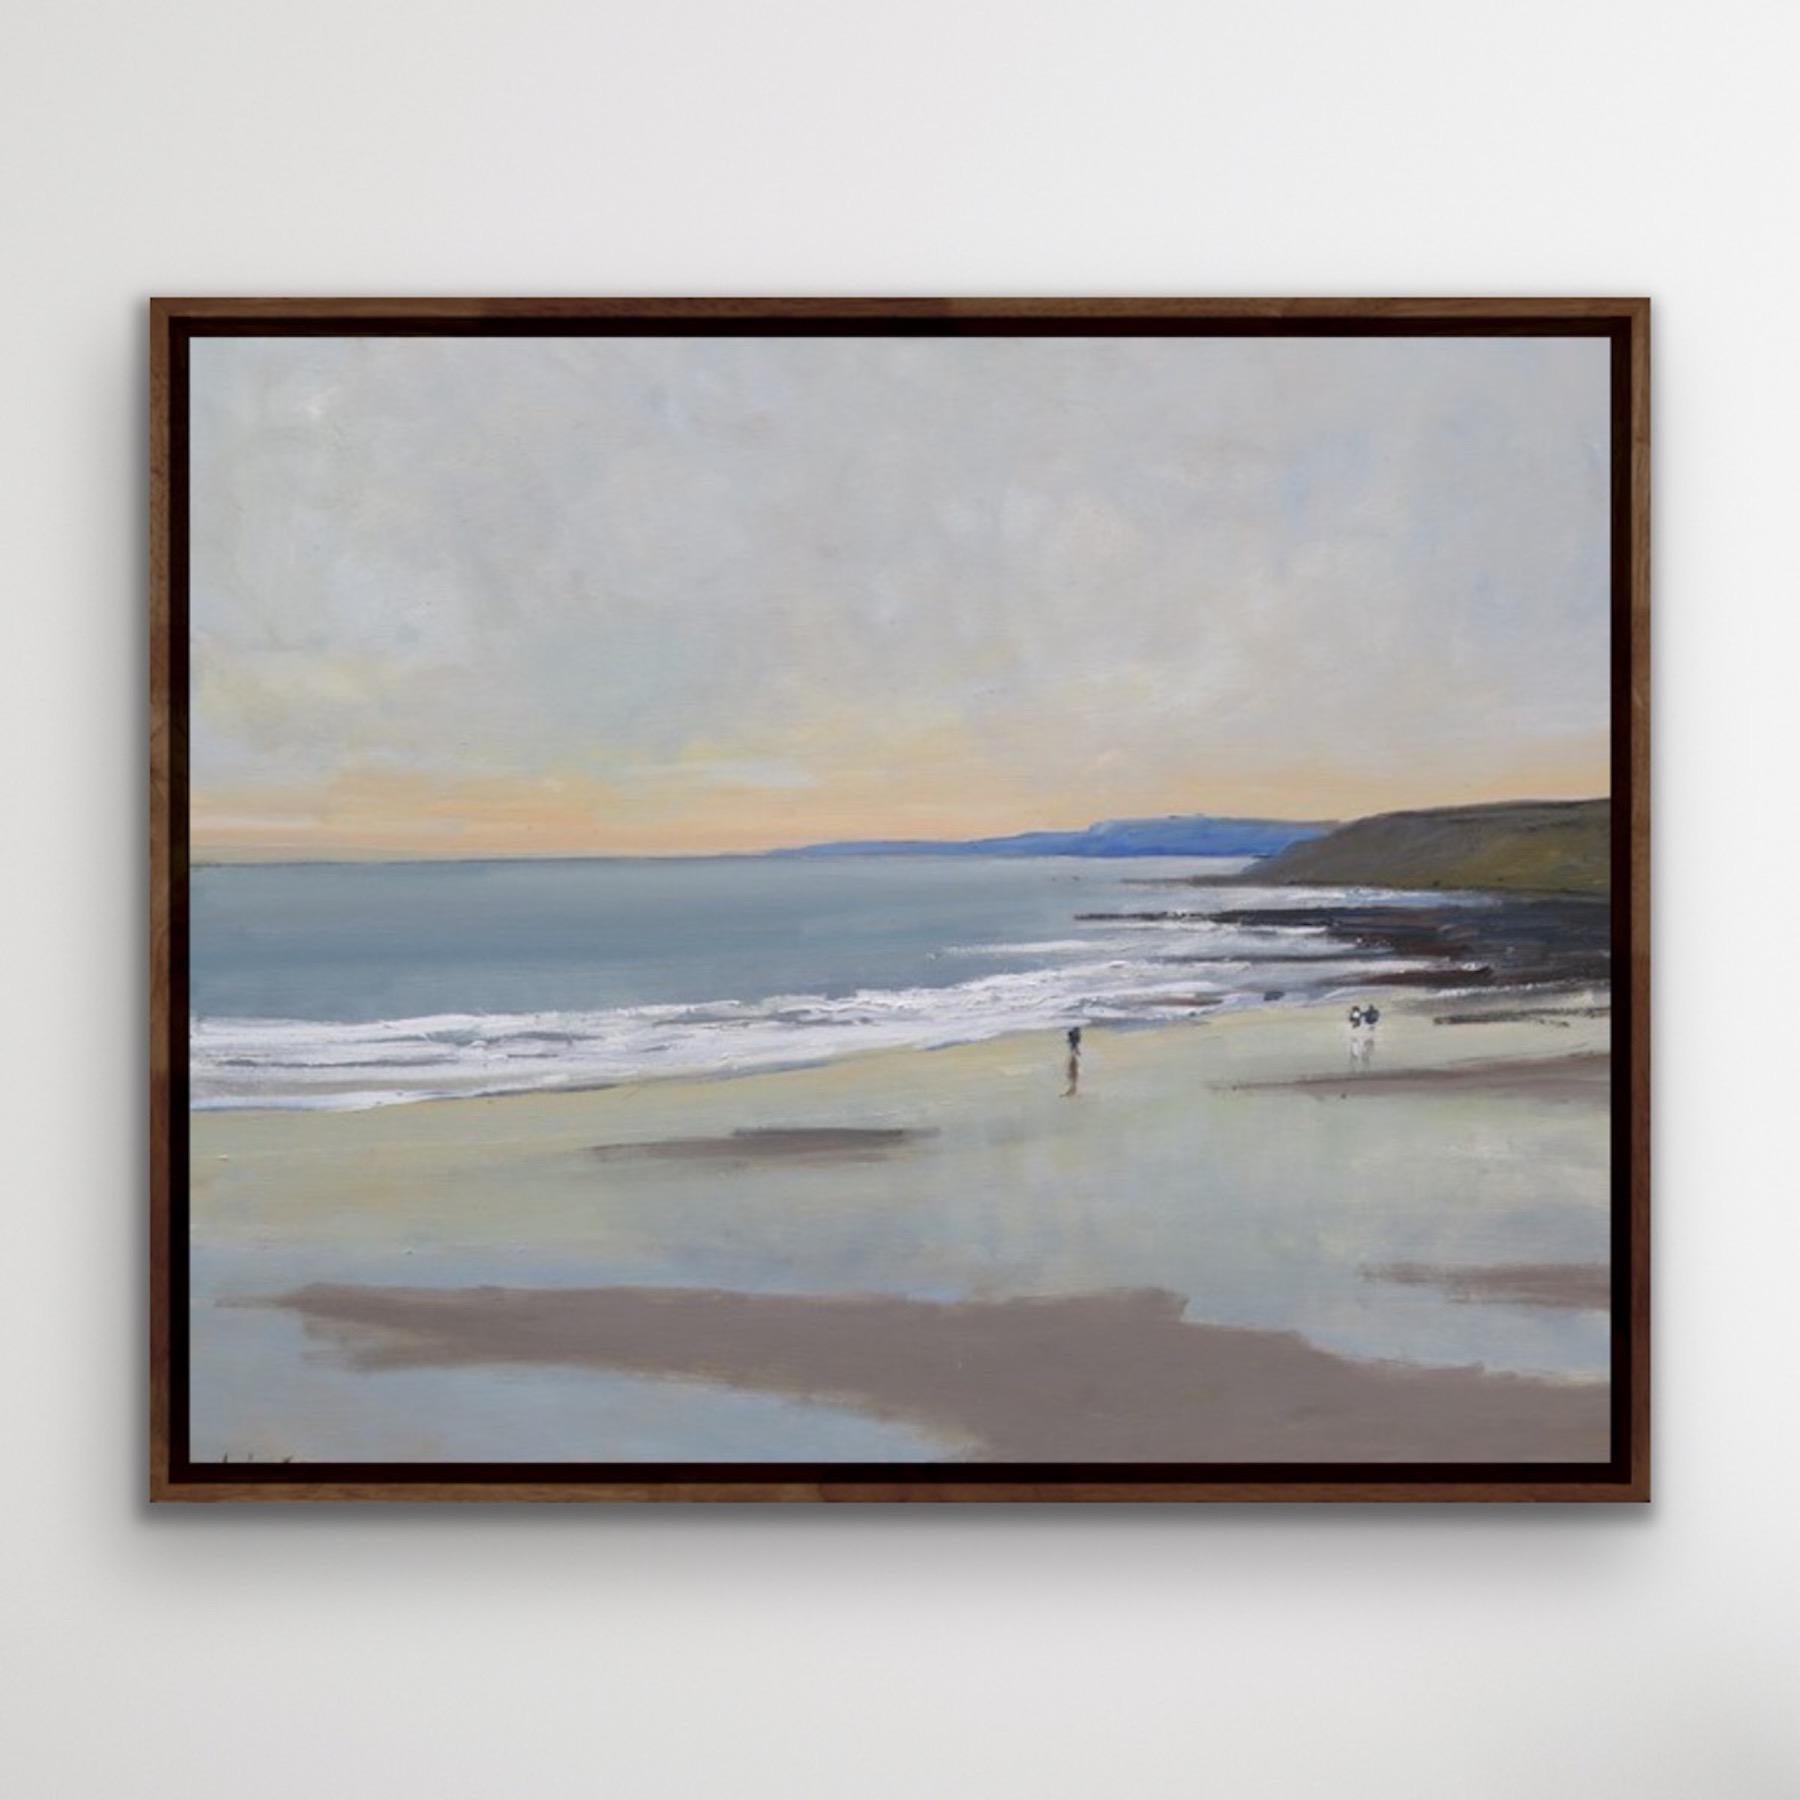 Scarborough, Sept 30 [2022]

Scarborough, Nov 15 Original Painting Oil Paint on canvas. Scarborough, Nov 14, is an original seascape painting by Malcom Ludvigsen. It’s a proper plein-air oil painting, painted on the spot on Scarborough beach in late